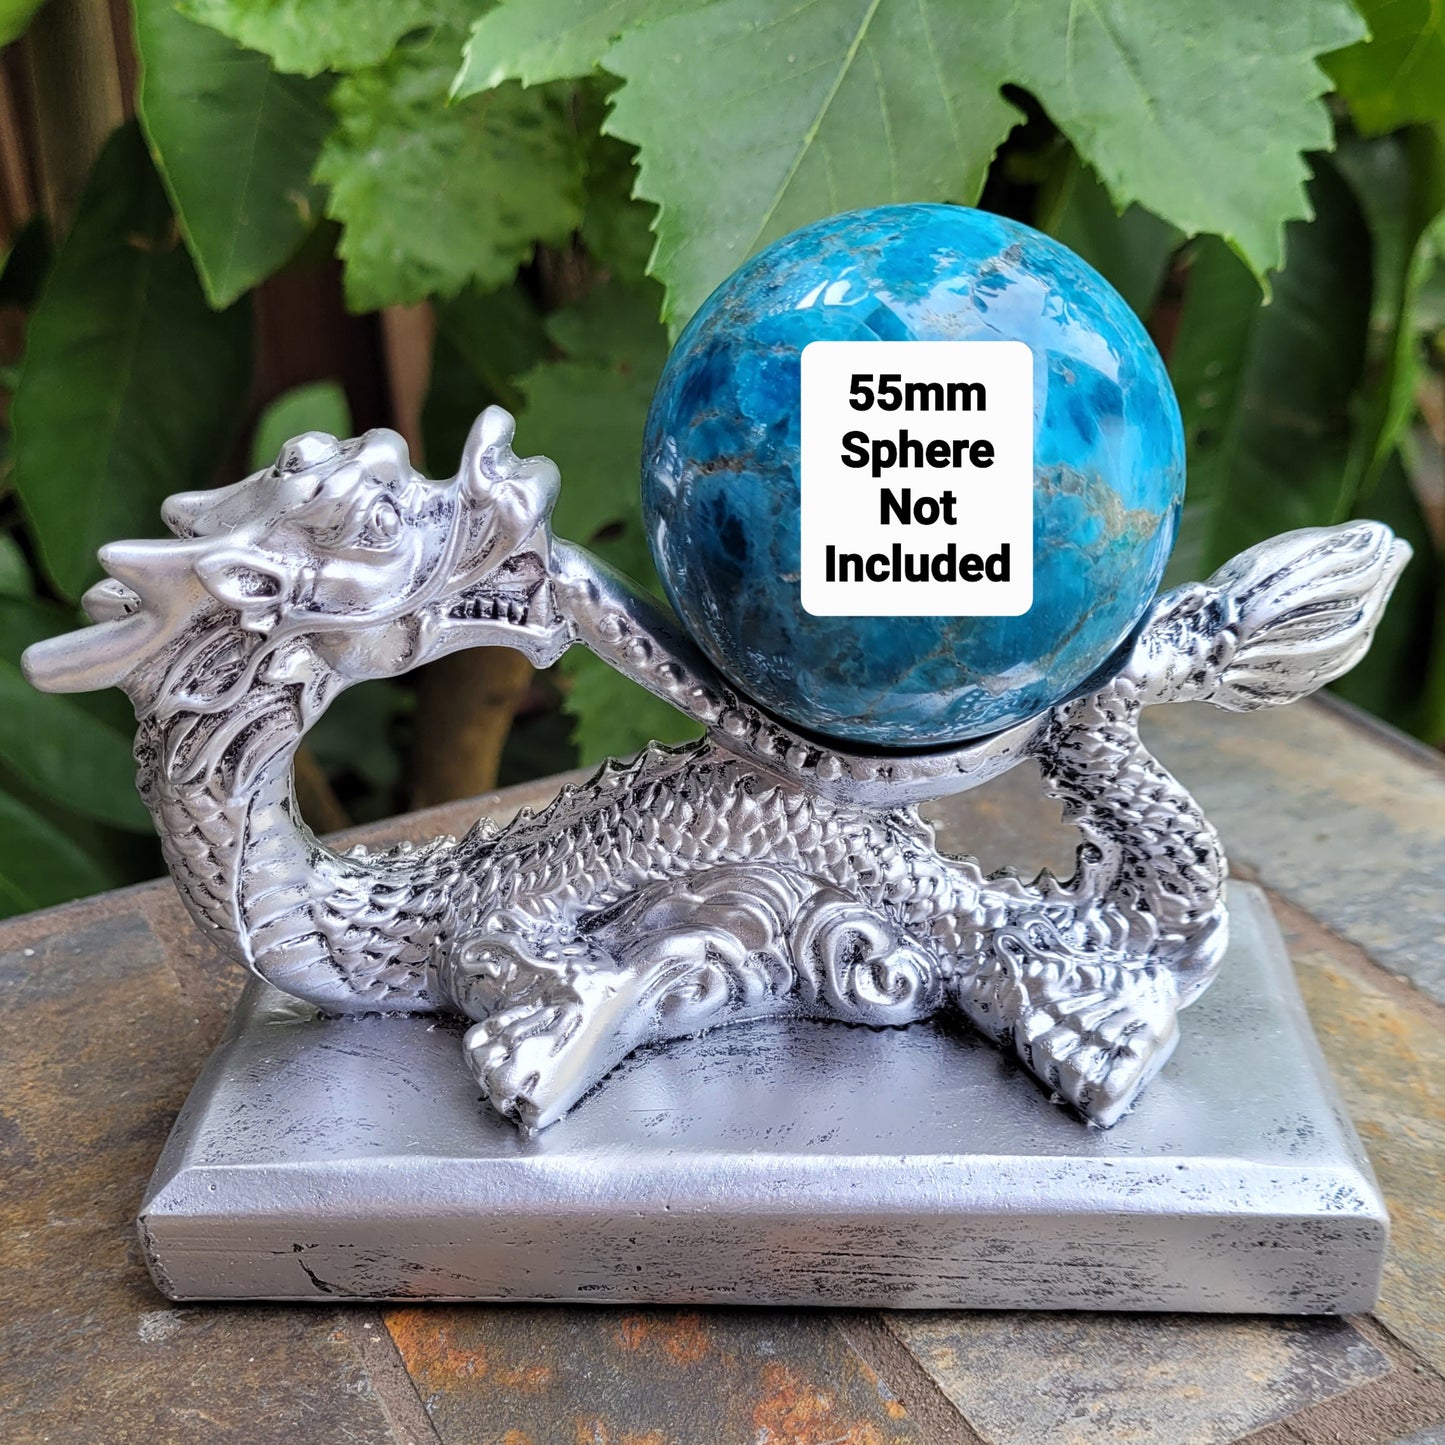 Dragon Sphere Display Stands in 3 Colors, for Crystal Balls or Eggs 1" to 2.7" (25mm to 68mm)